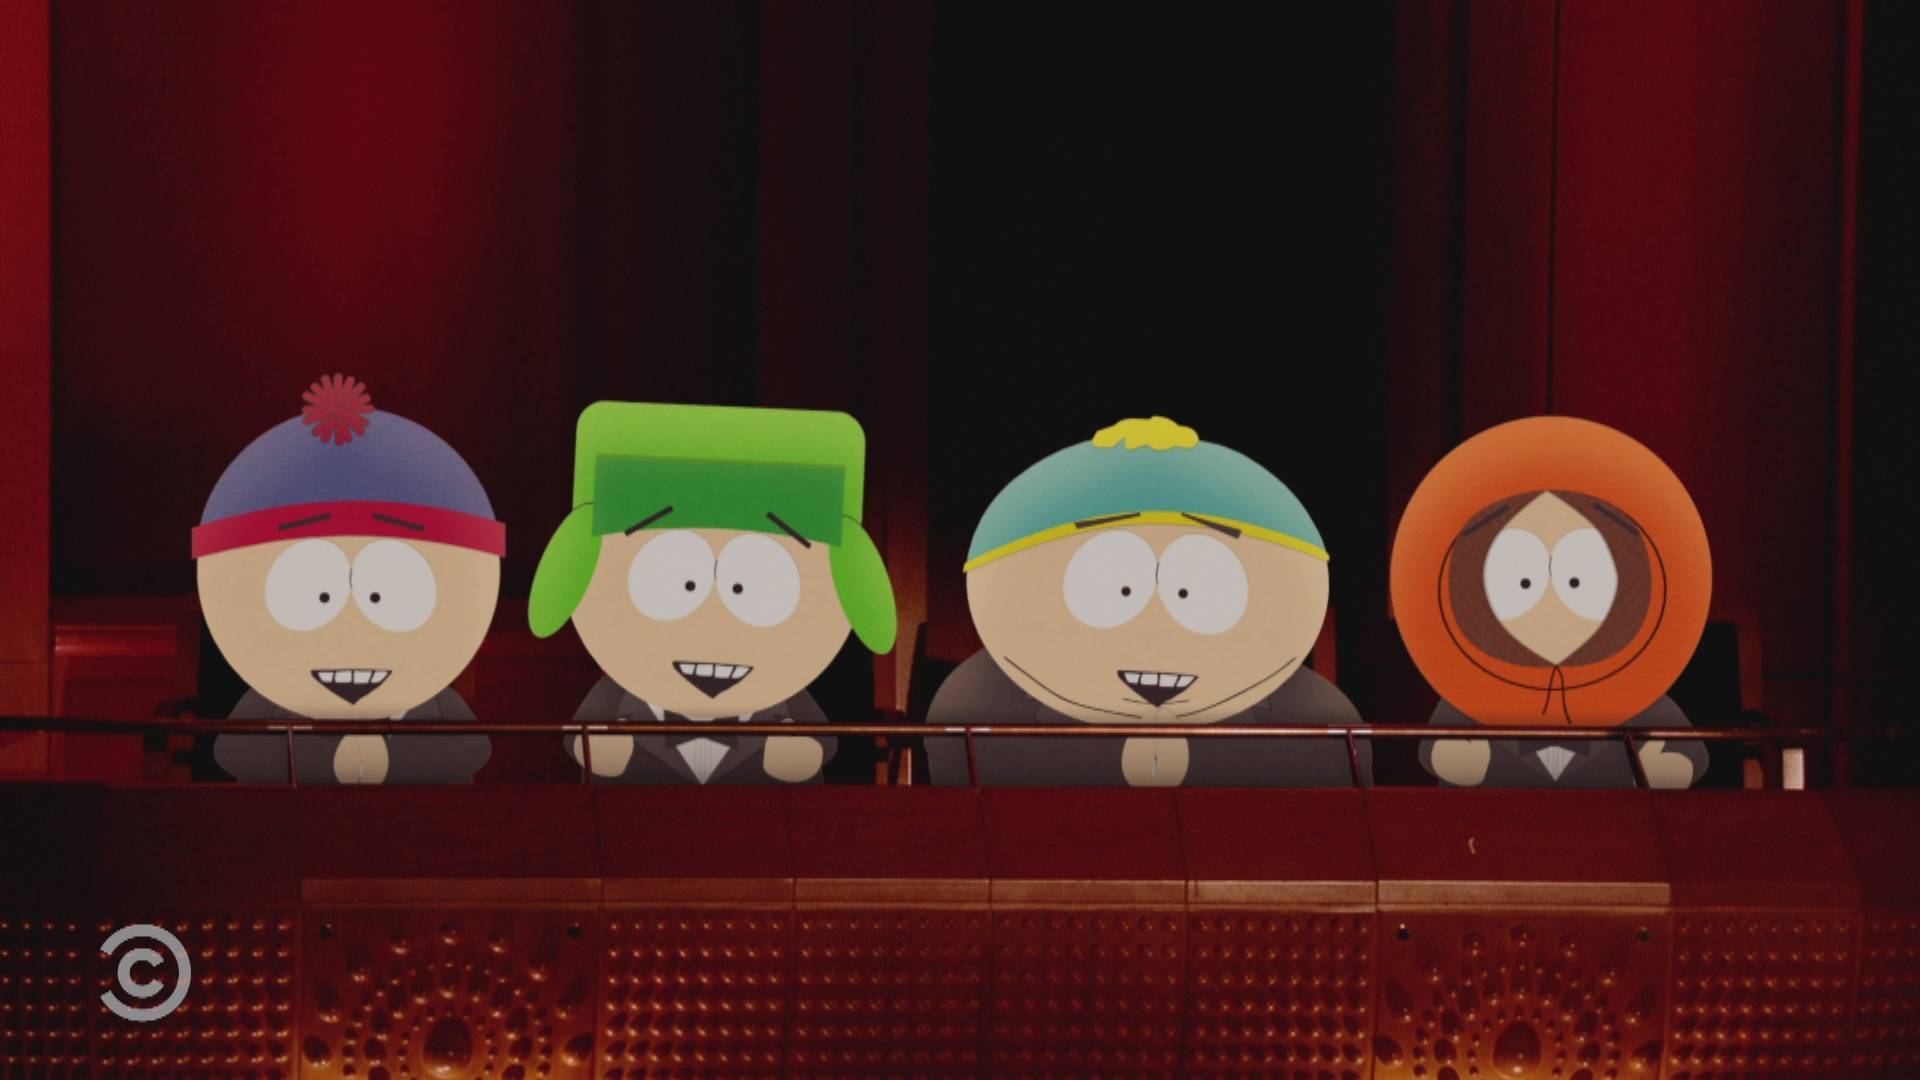 South Park - Season 26, Ep. 2 - The Worldwide Privacy Tour - Full